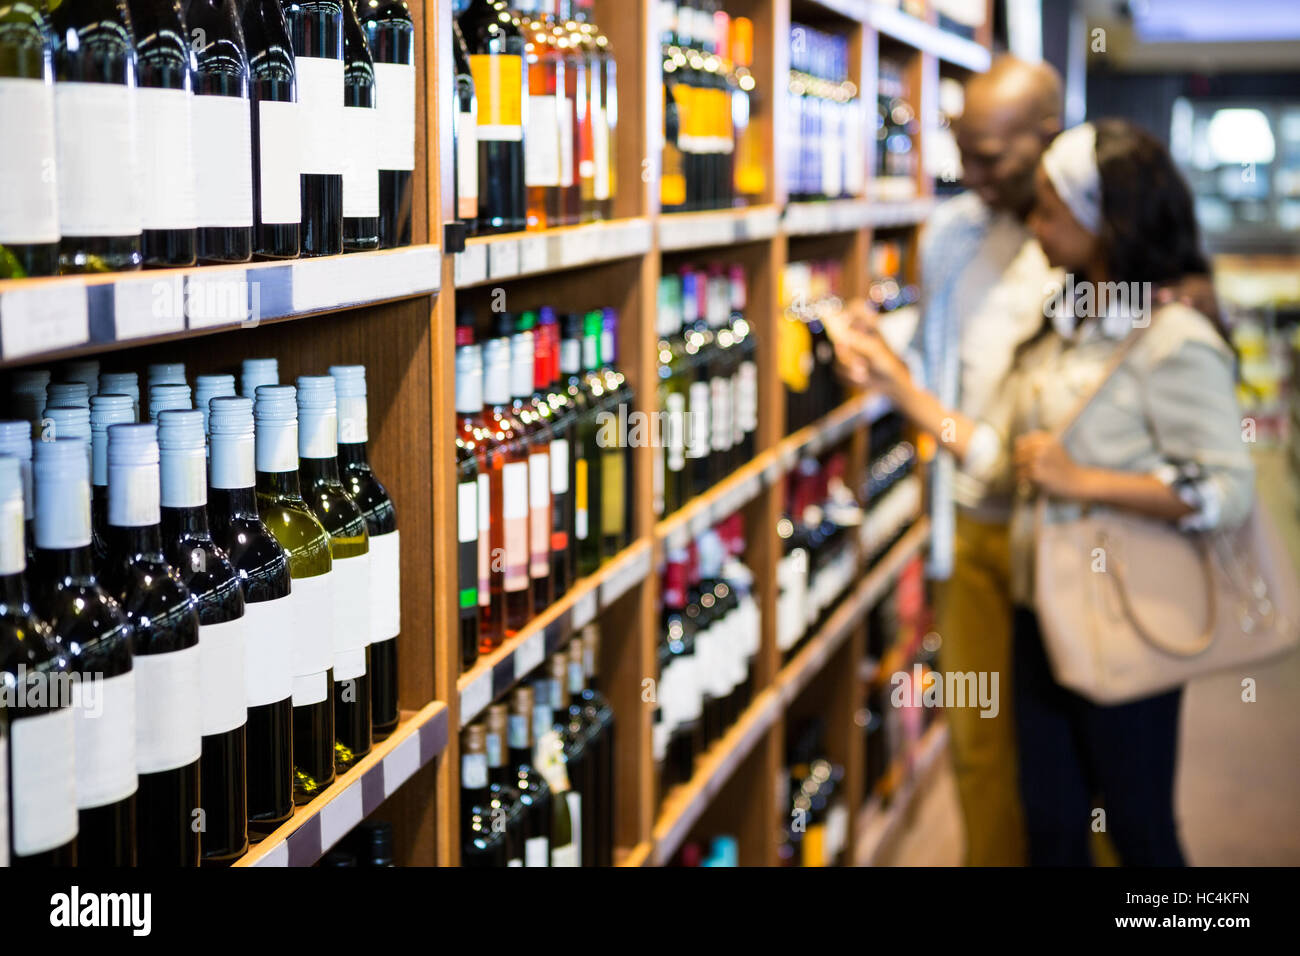 Couple looking at wine bottle in grocery section Stock Photo